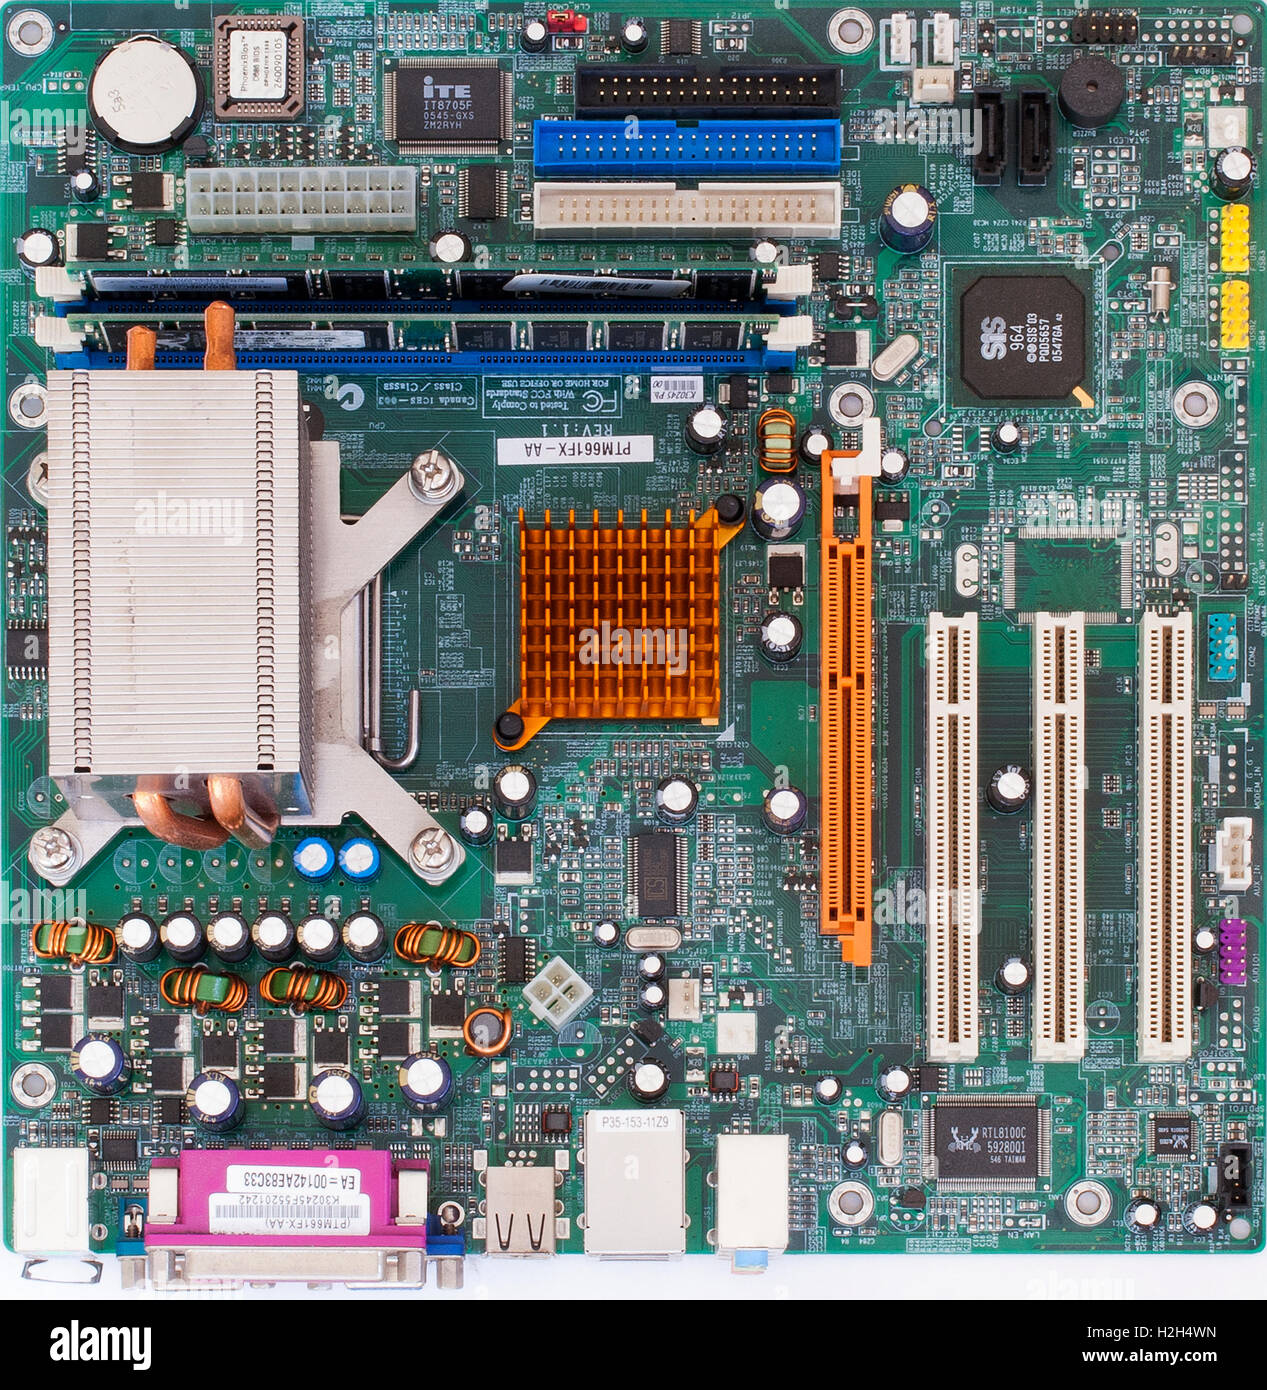 Motherboard from a modern PC Stock Photo - Alamy